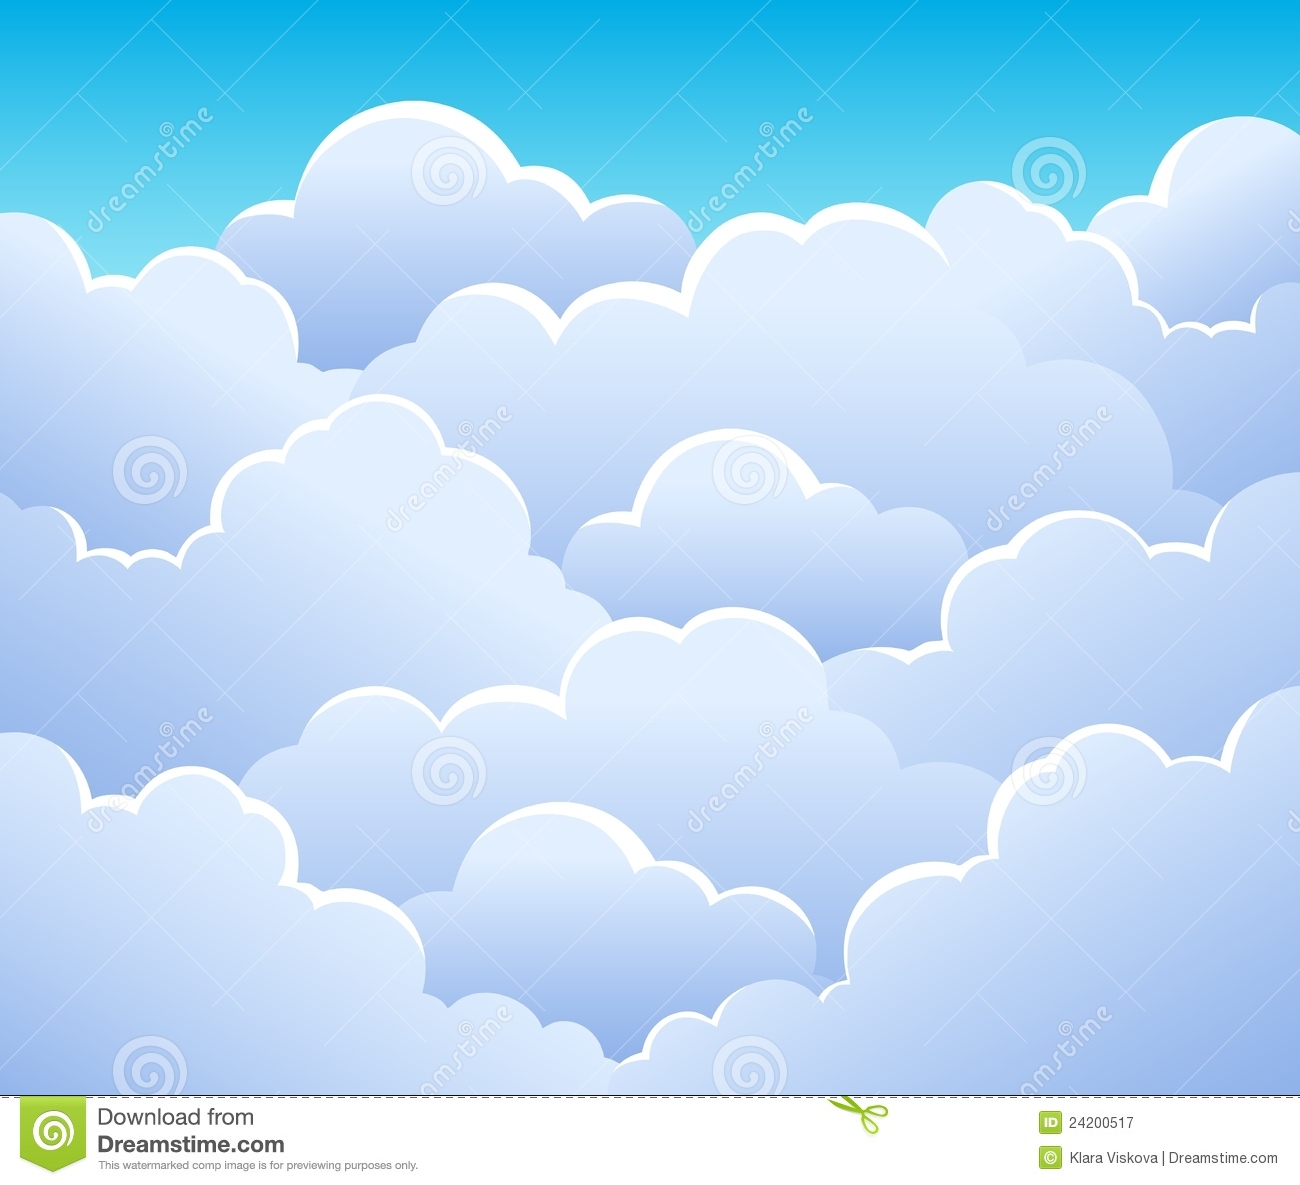 Cloudy Sky Background 3 Royalty Free Stock Photography   Image